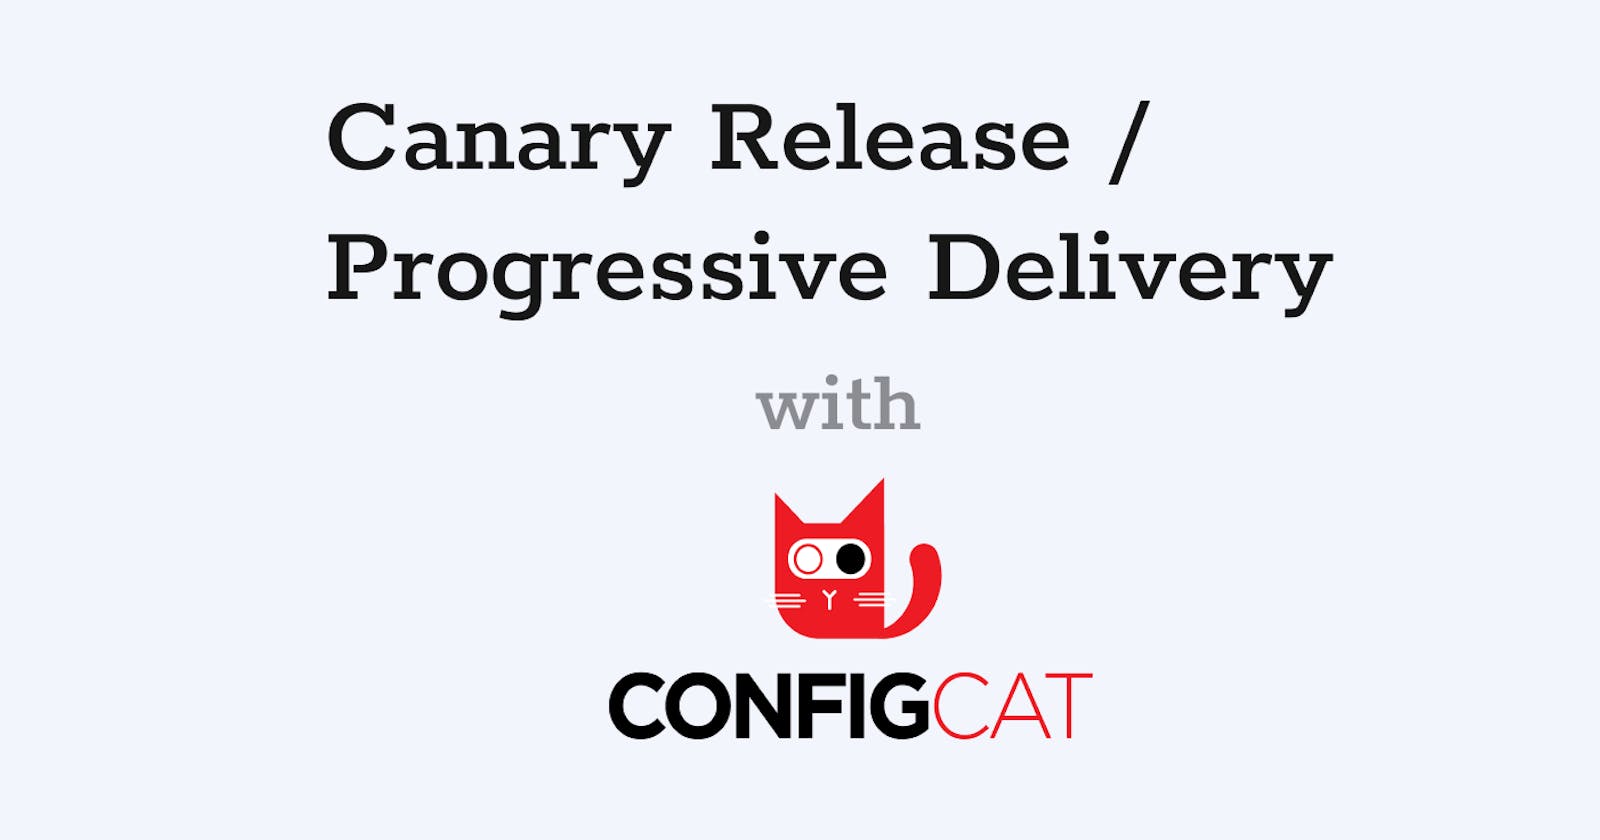 How to do Canary Release / Progressive Delivery with ConfigCat